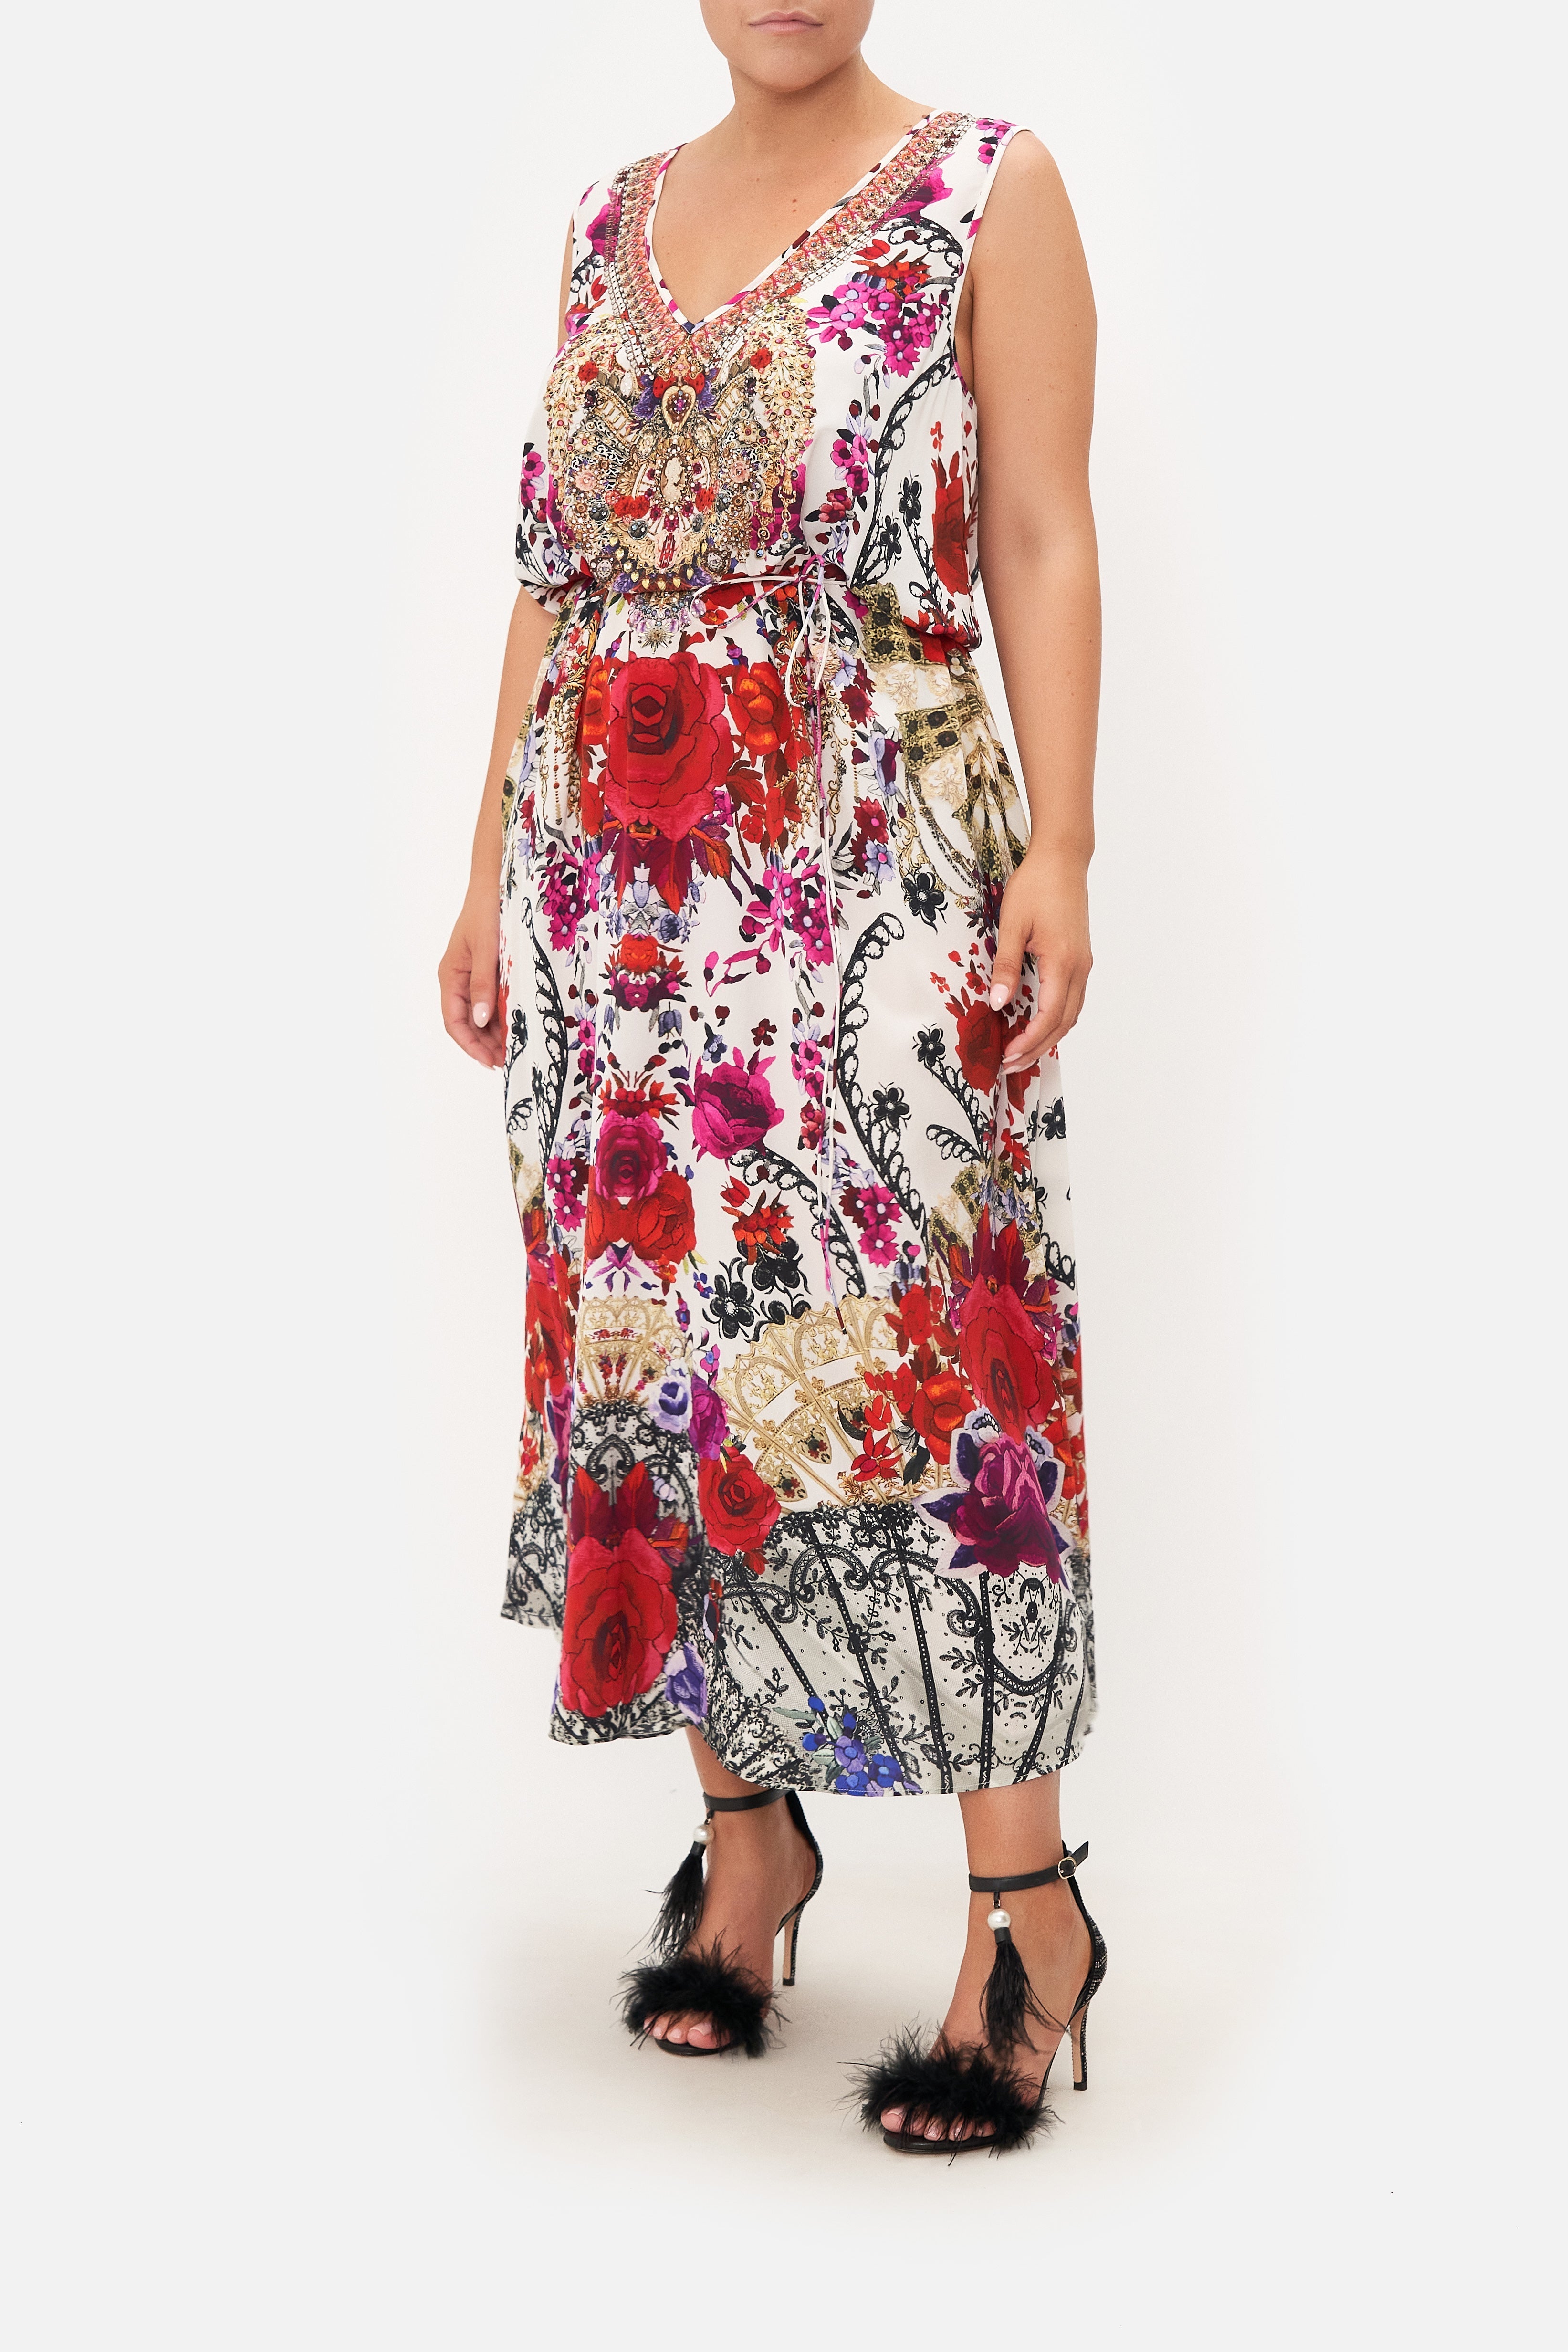 Front view of curvy model wearing CAMILLA plus size maxi dress in Reign Of Roses print